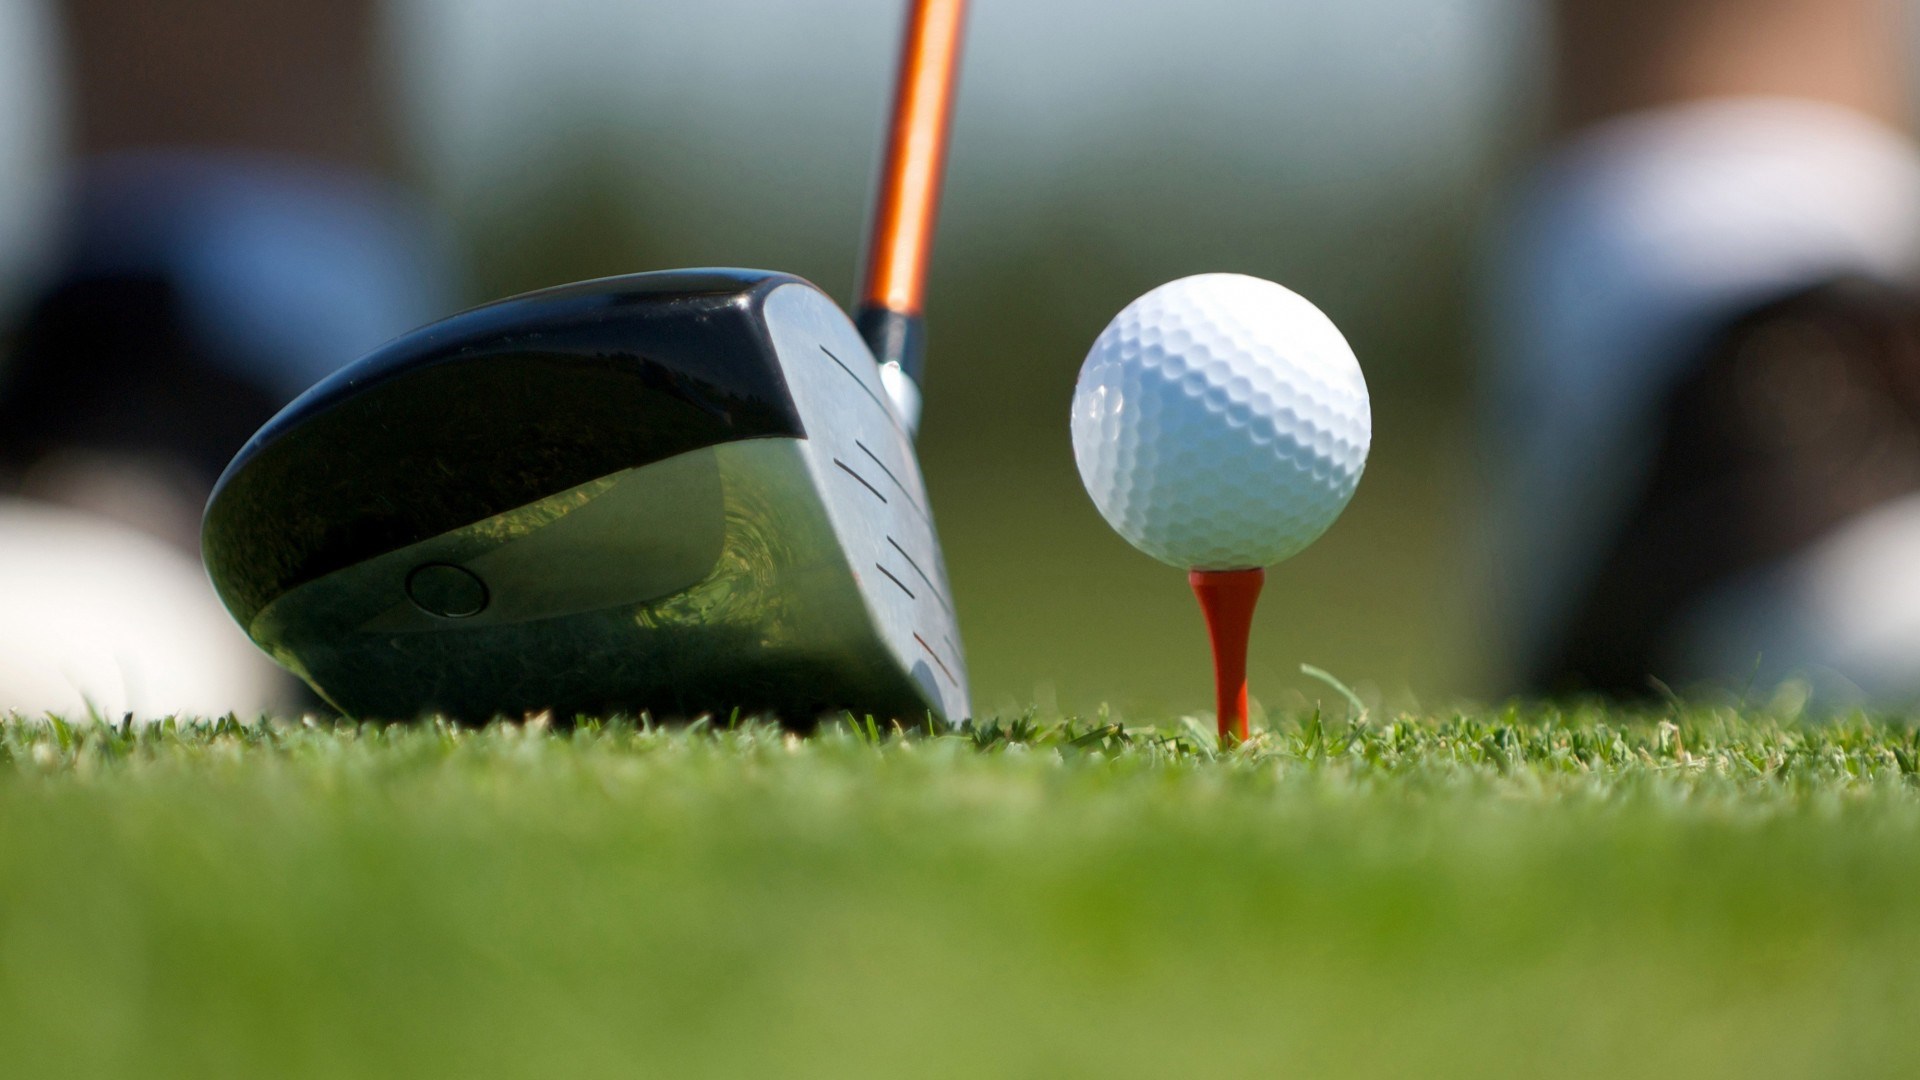 Playing Golf in Ground | HD Wallpapers